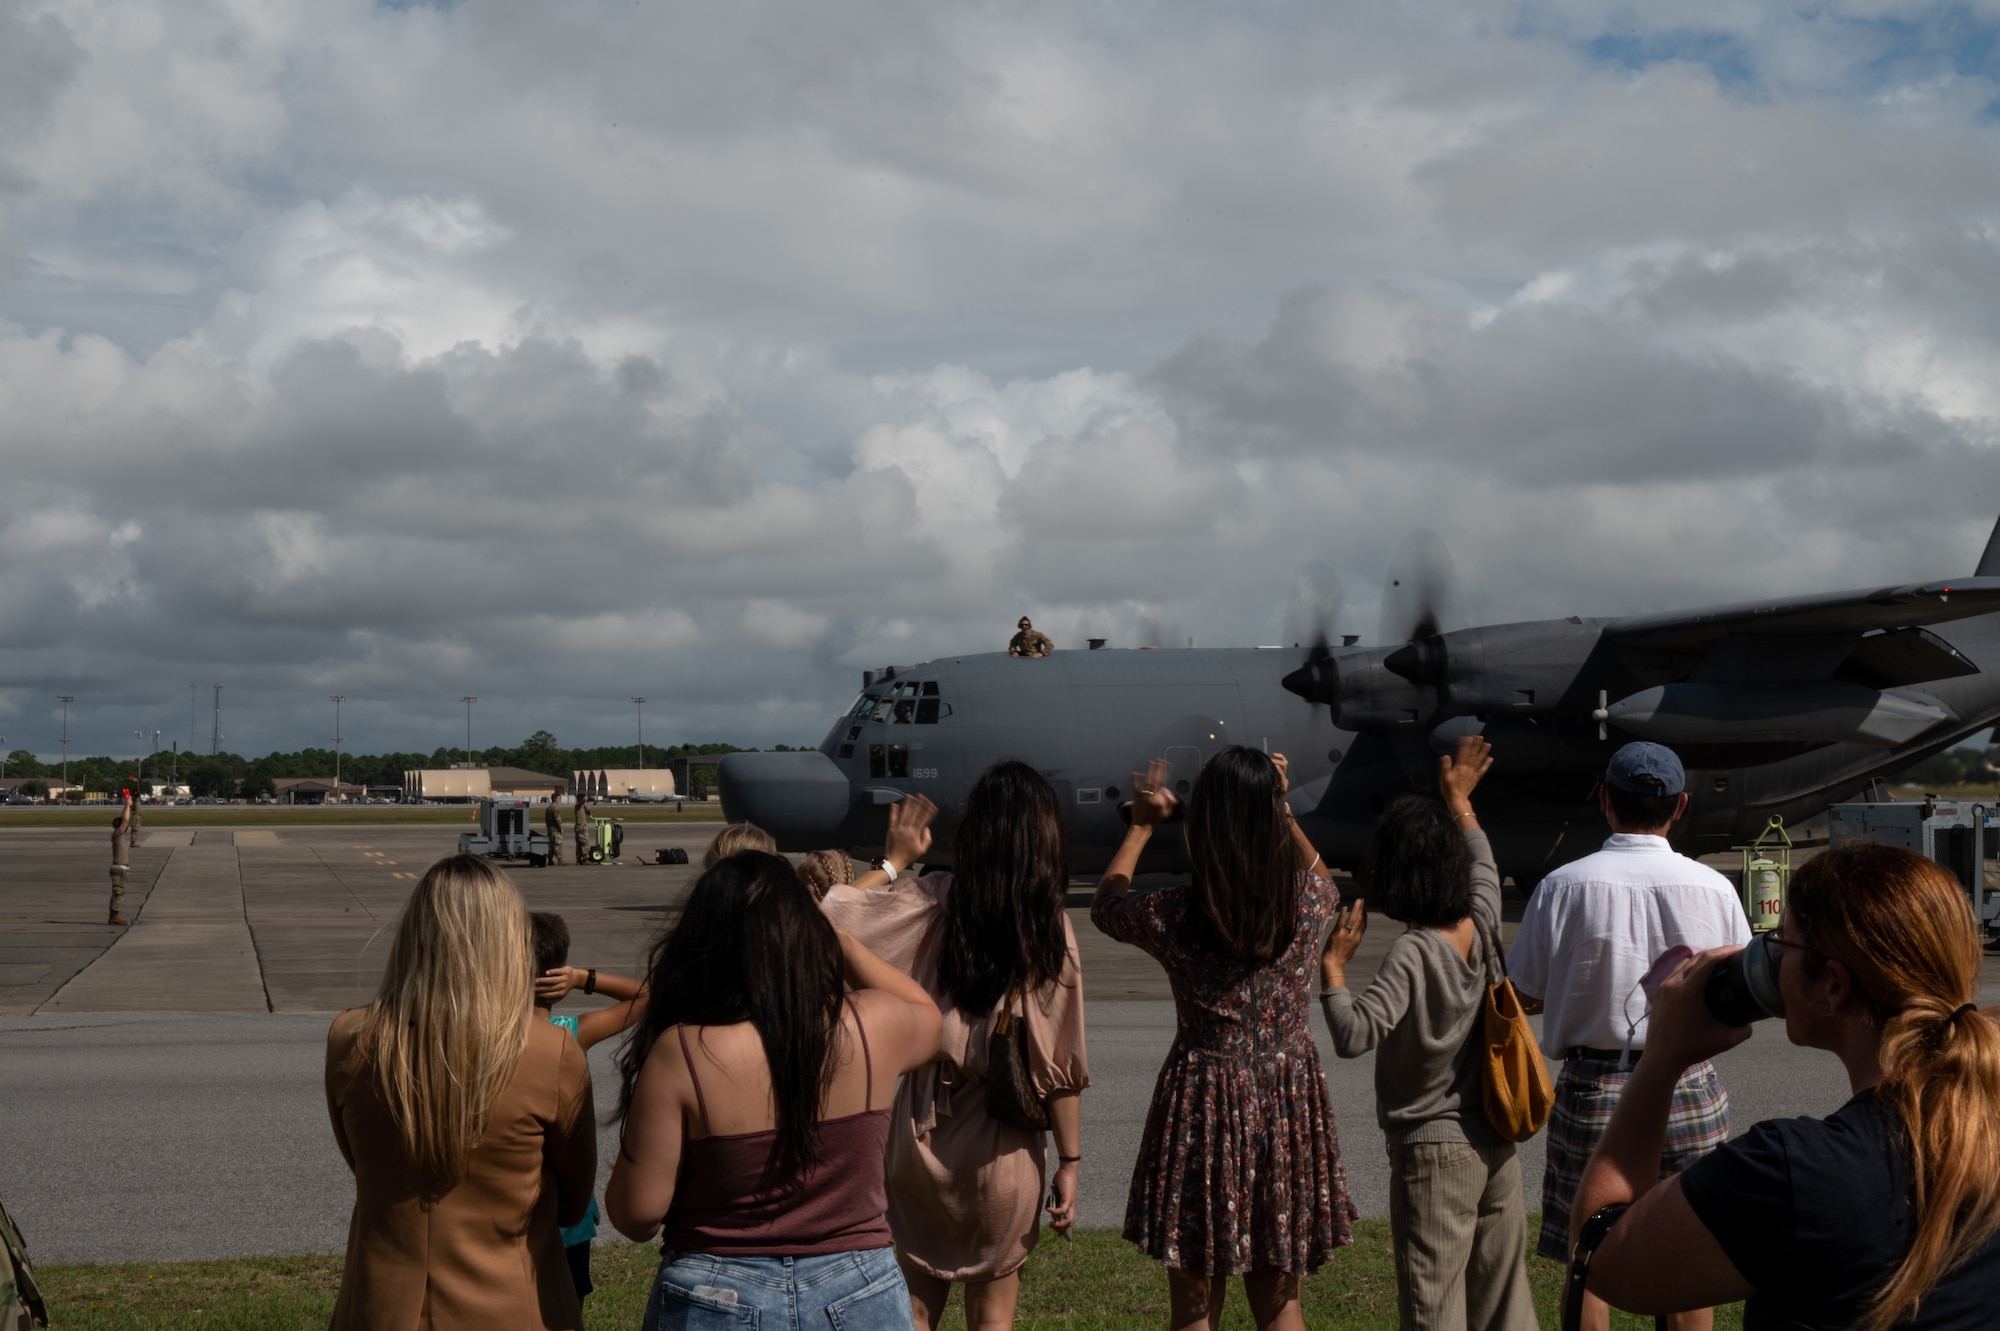 Families wave at the crew from an MC-130H Combat Talon II aircraft as they return from a deployment Oct. 6, 2021 at Hurlburt Field, Florida. The MC-130H is being phased out in time for the new MC-130J Commando II aircraft to take over the mission. (U.S. Air Force photo by Staff Sgt. Rito Smith)